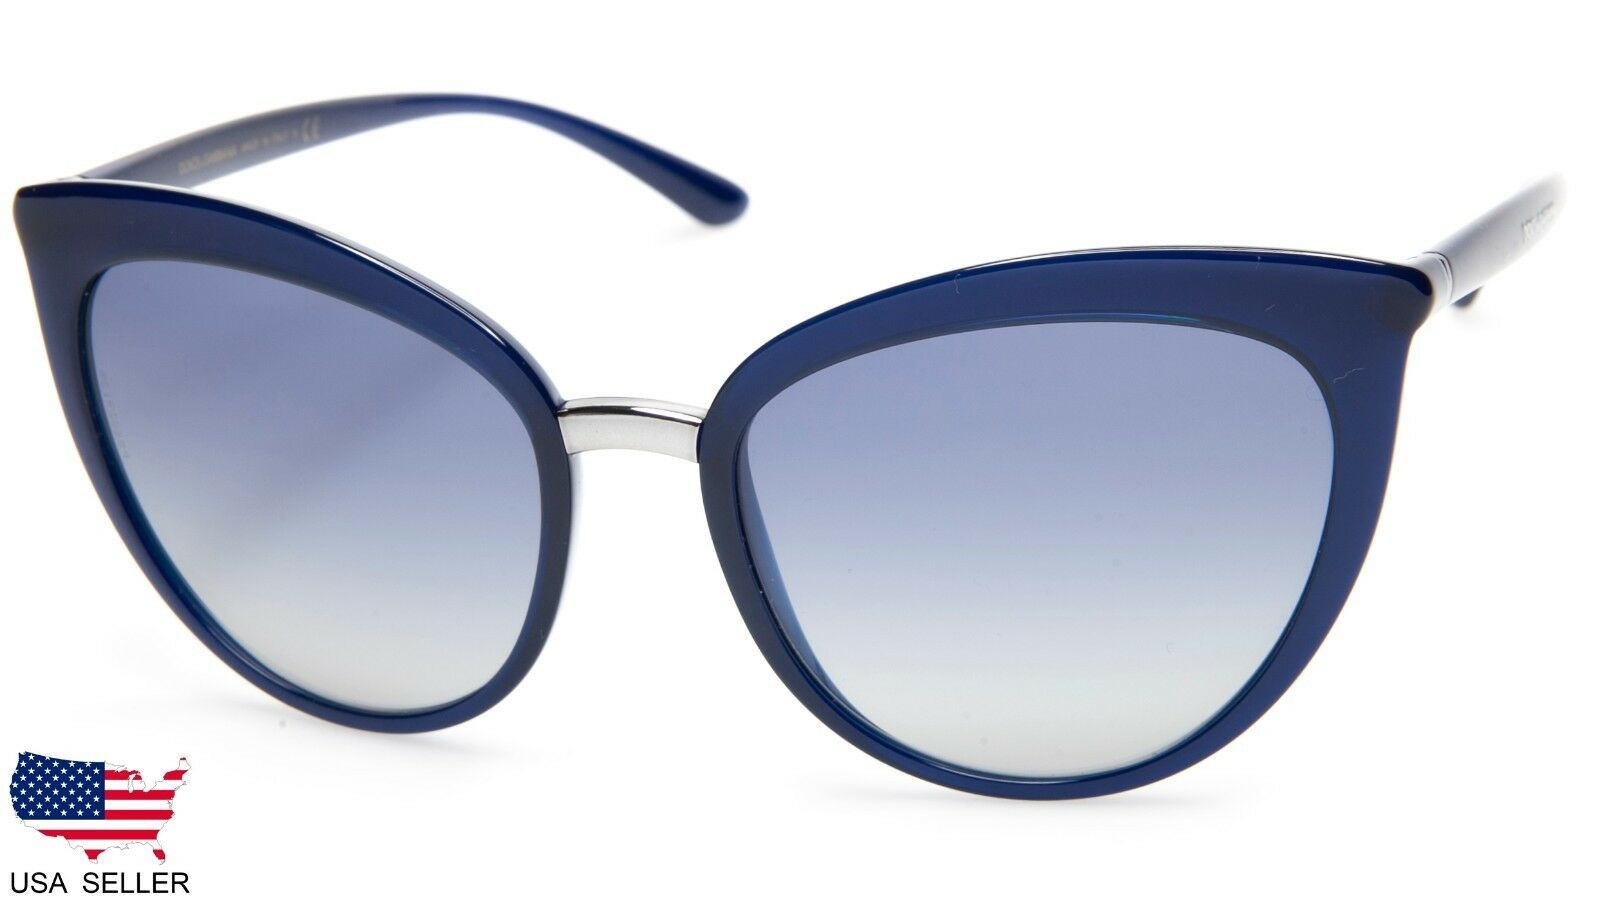 Primary image for NEW D&G Dolce&Gabbana DG6113 3094/4L OPAL BLUE SUNGLASSES 55-18-140 B48mm Italy